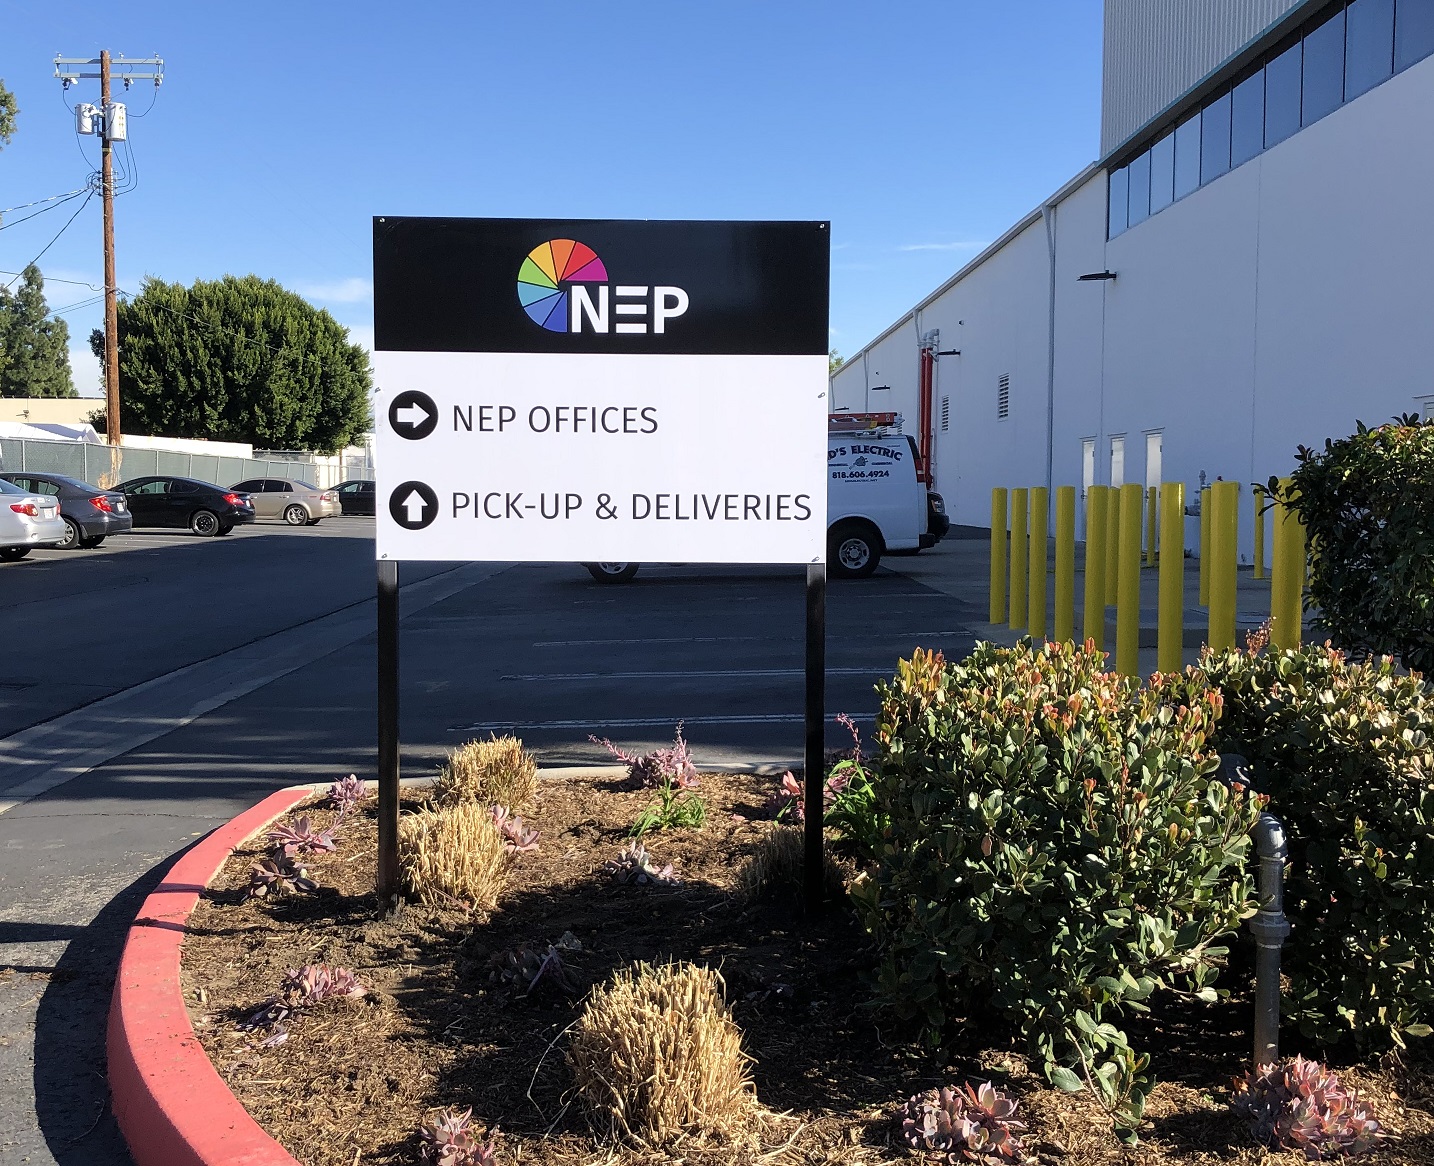 You are currently viewing Outdoor Wayfinding Signs for Bexel in San Fernando Valley